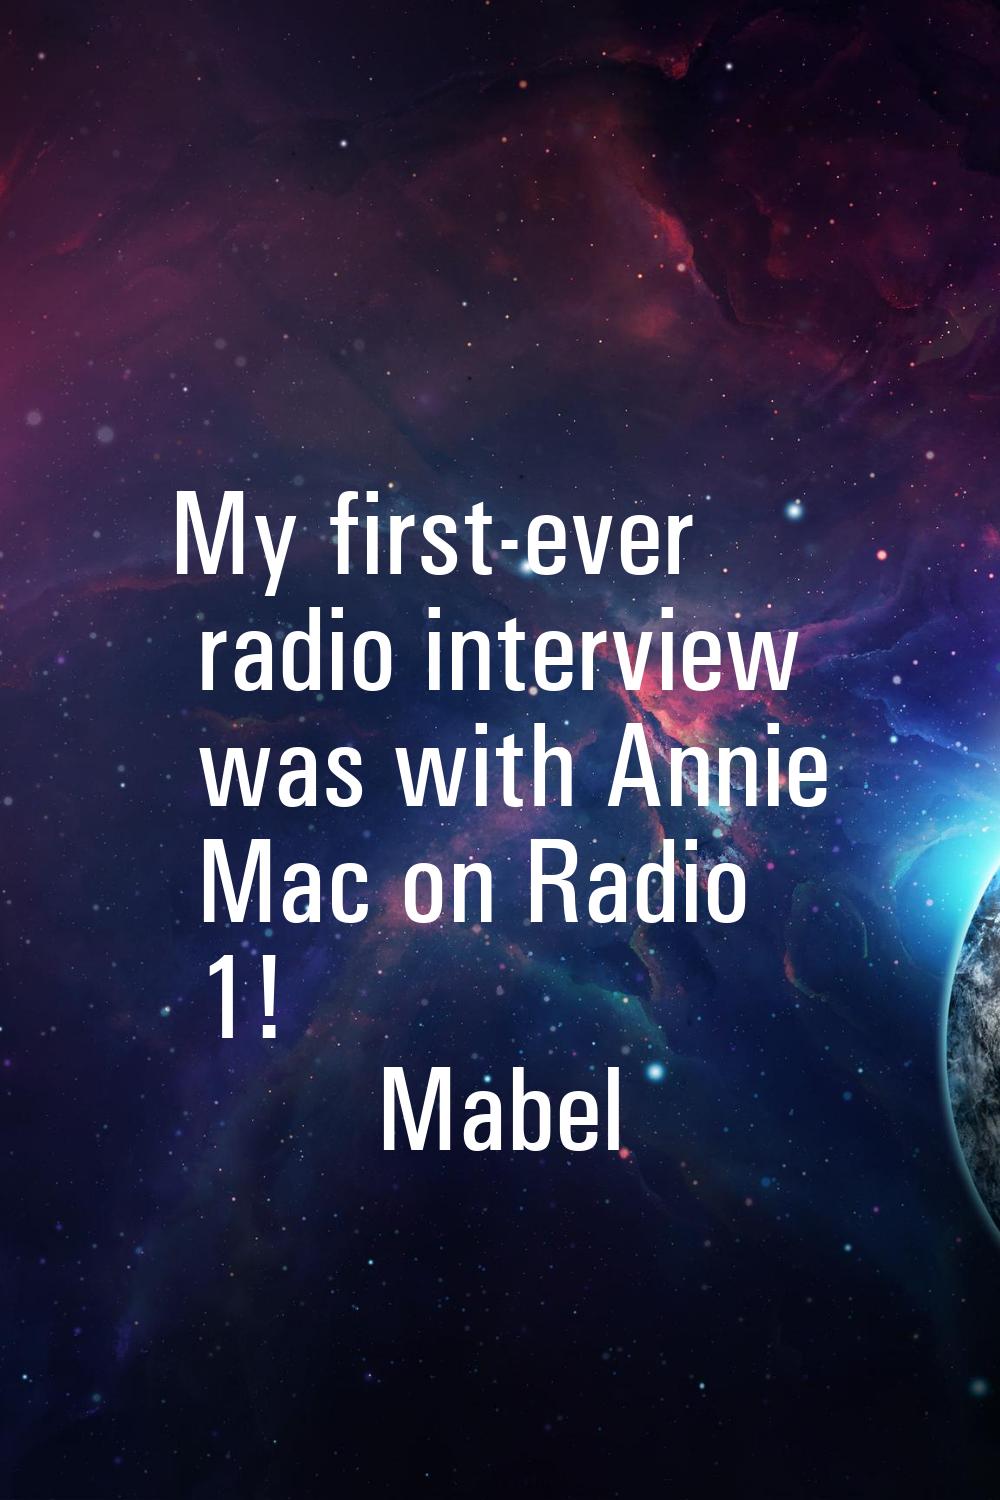 My first-ever radio interview was with Annie Mac on Radio 1!